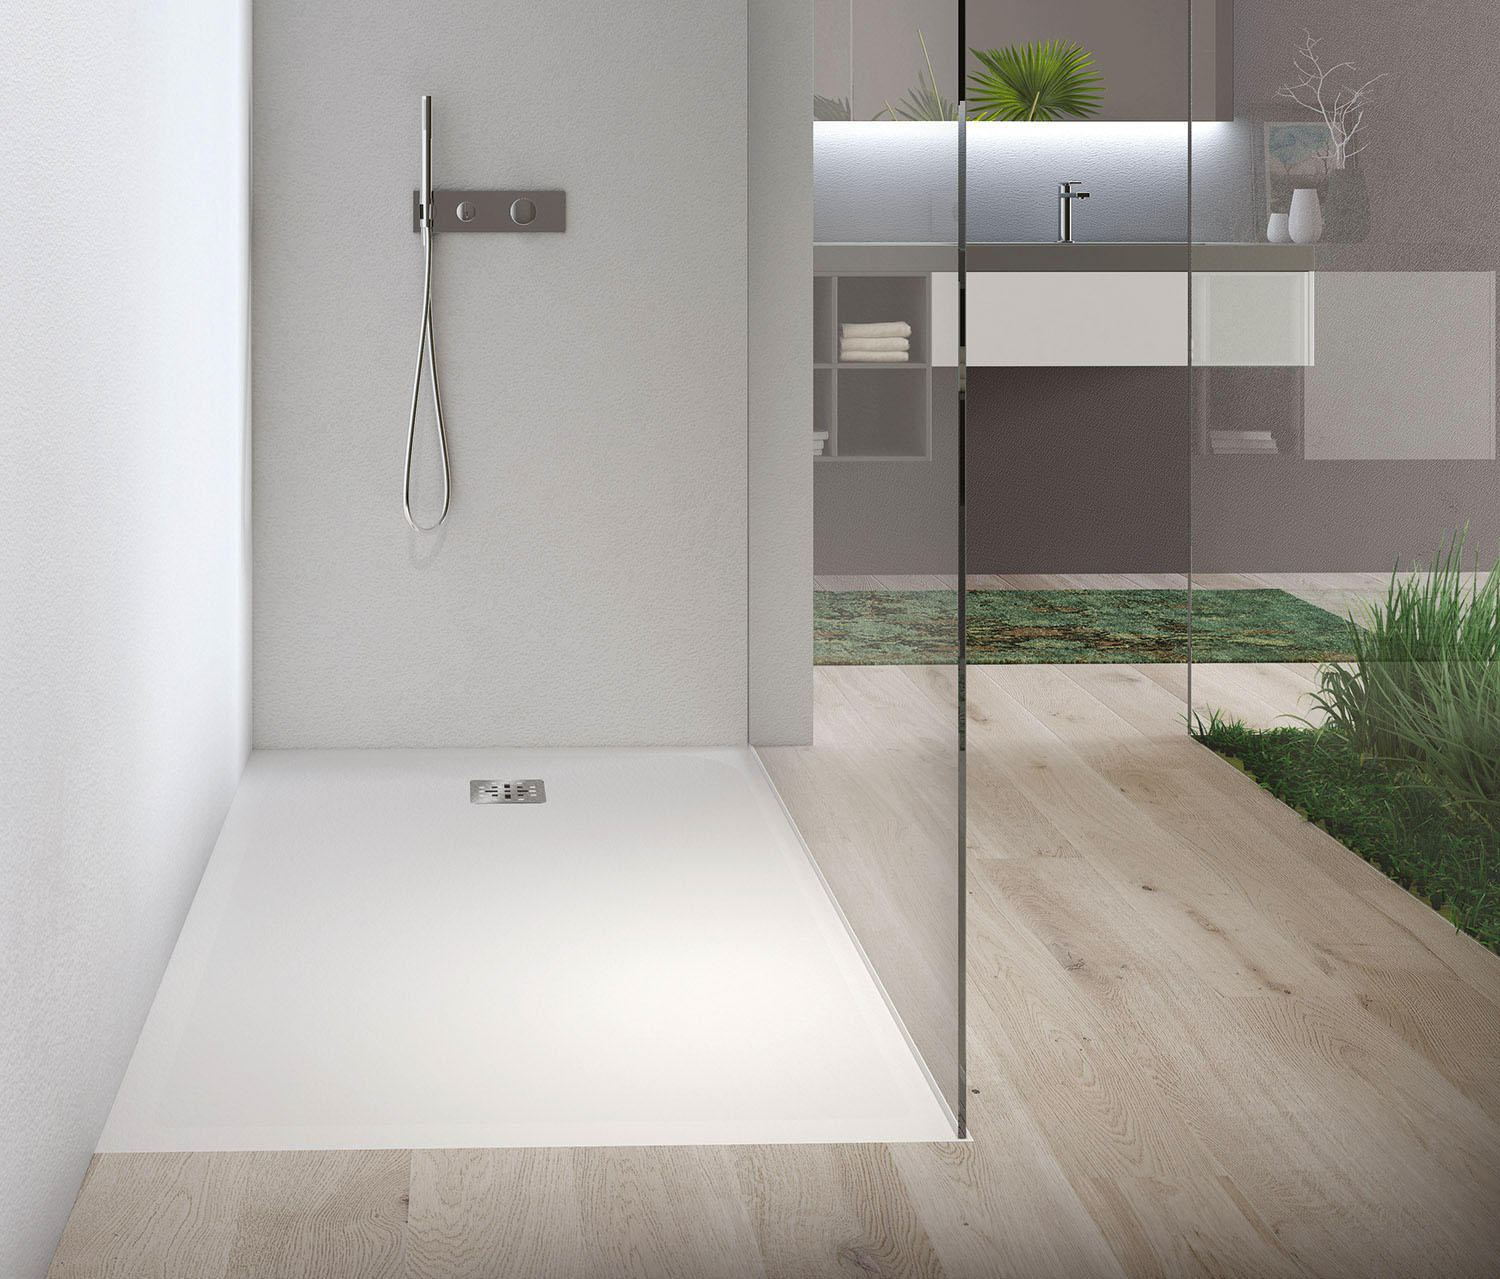 https://www.ideagroup.it/blog/wp-content/uploads/2019/08/come-scegliere-piatto-doccia-ideagroup-02.jpg?utm_source=blog-ideagroup&utm_medium=link&utm_campaign=choosing-the-ideal-shower-tray-some-useful-tips